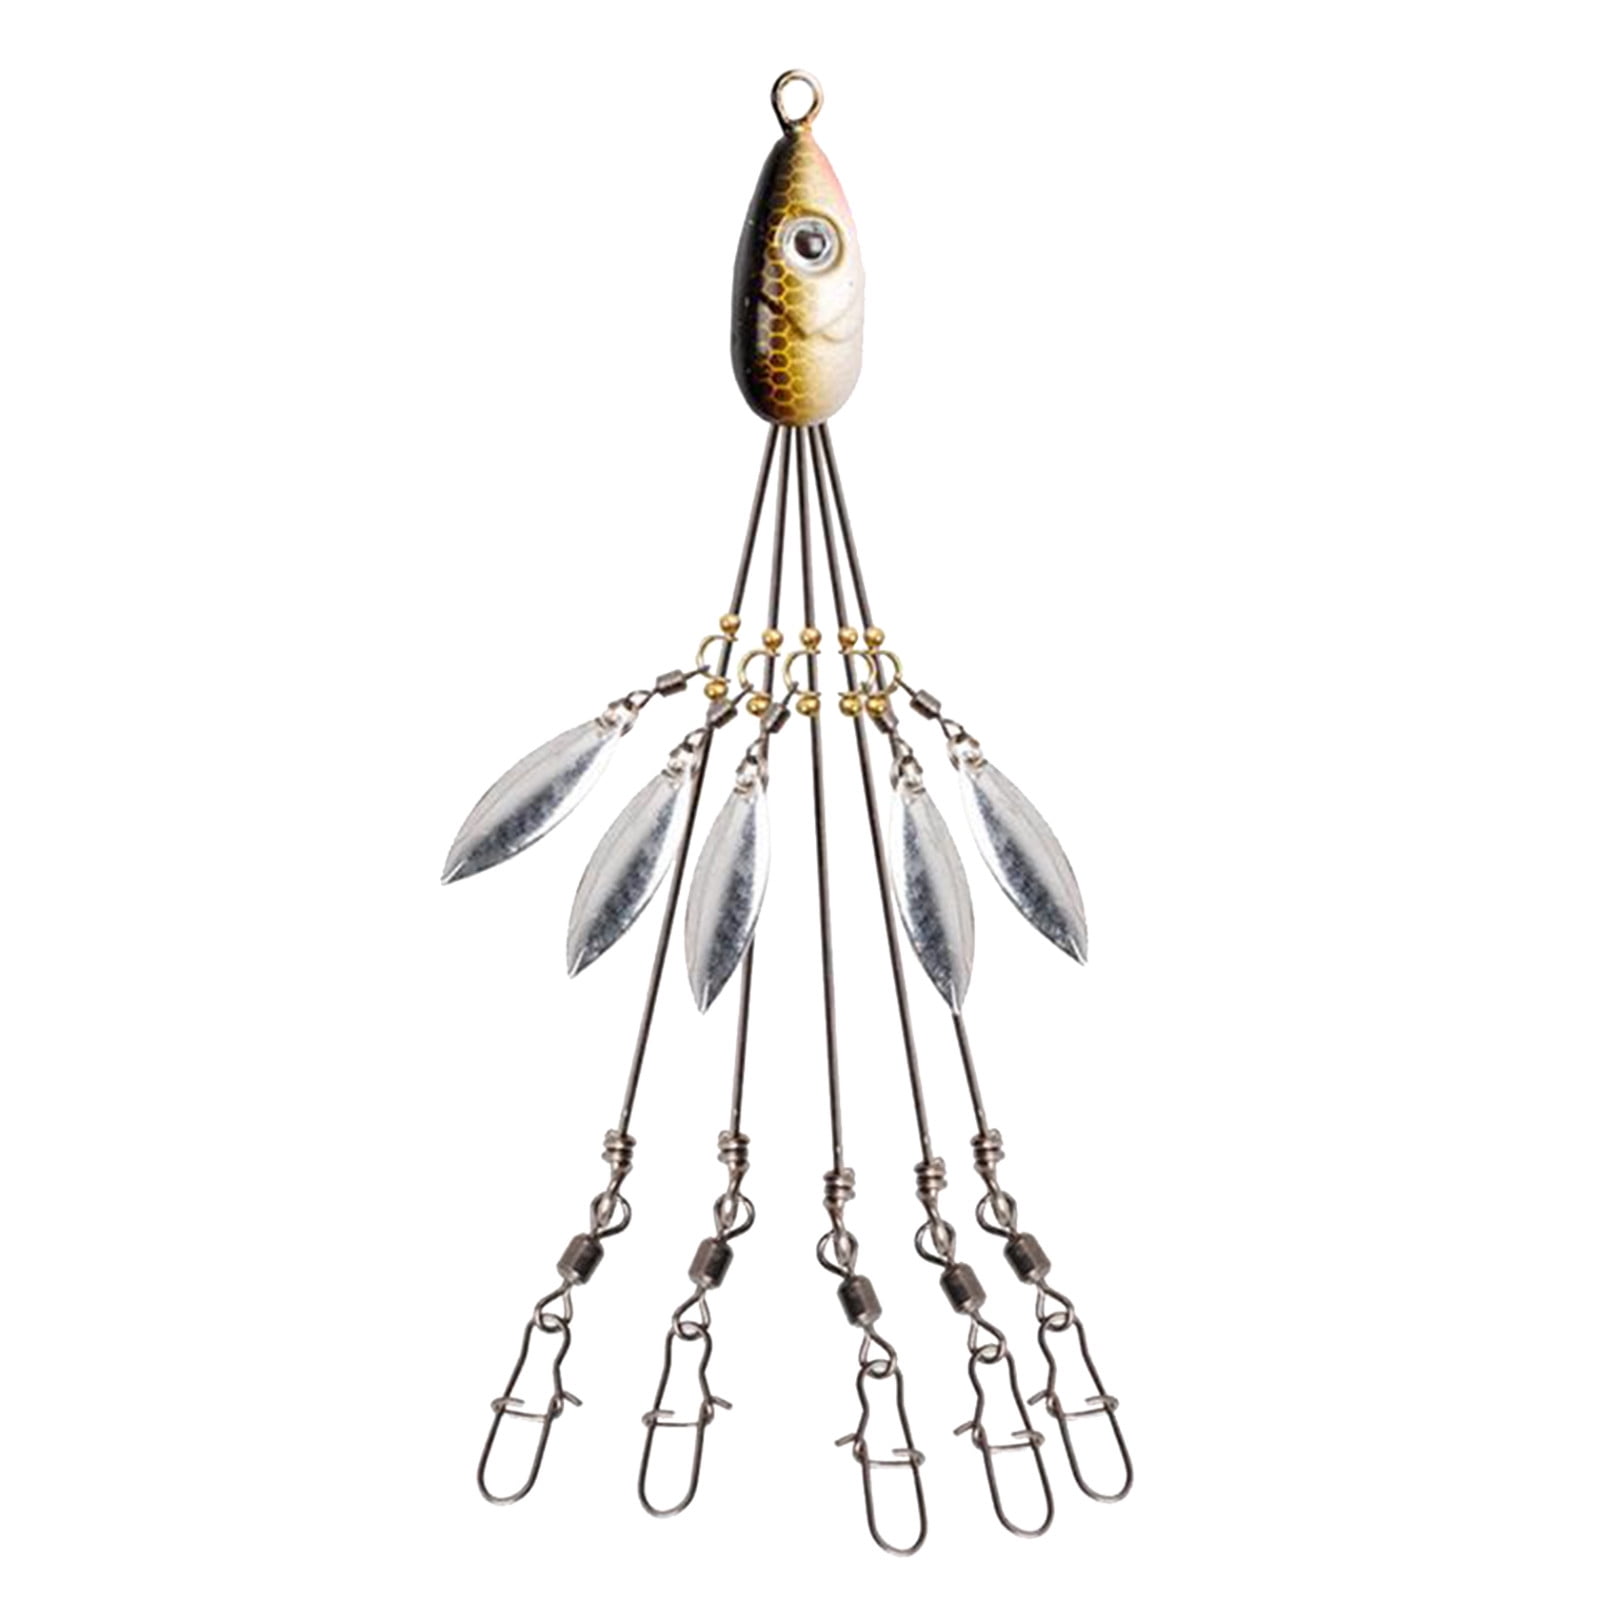 Voss 5 Arms Alabama Umbrella Rig Fishing Bait with Barrel Swivels for Bass Bait, C